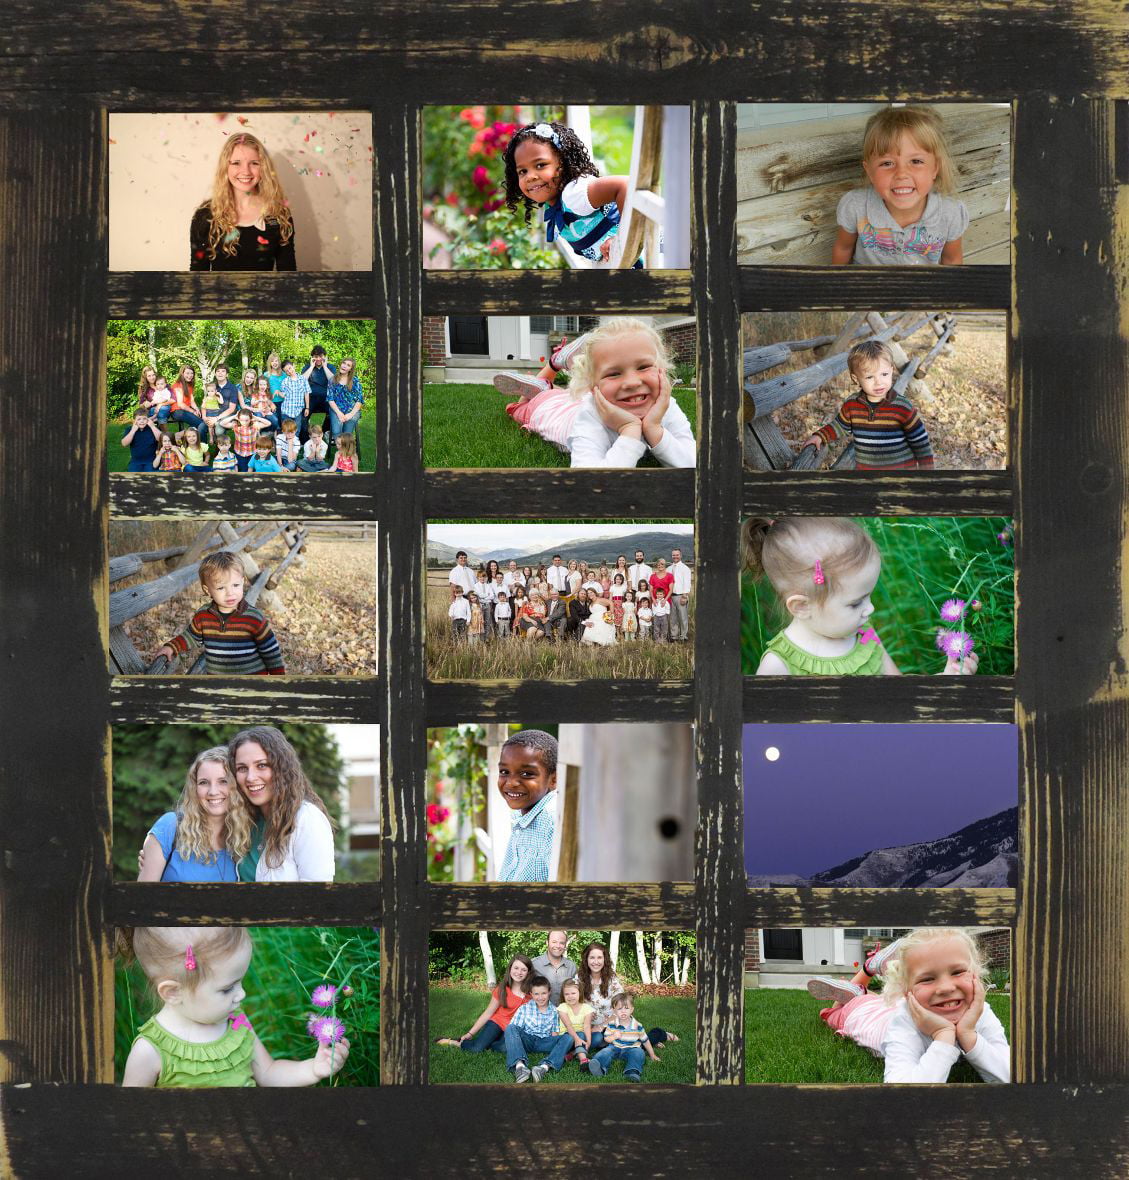 SONGMICS Collage Picture Frames, 4x6 Picture Frames Collage for Wall Decor,  10 Pack Photo Collage Frame for Gallery, Multi Family Picture Frame Set,  Glass Front, Assembly Required, Black, Christmas Gift